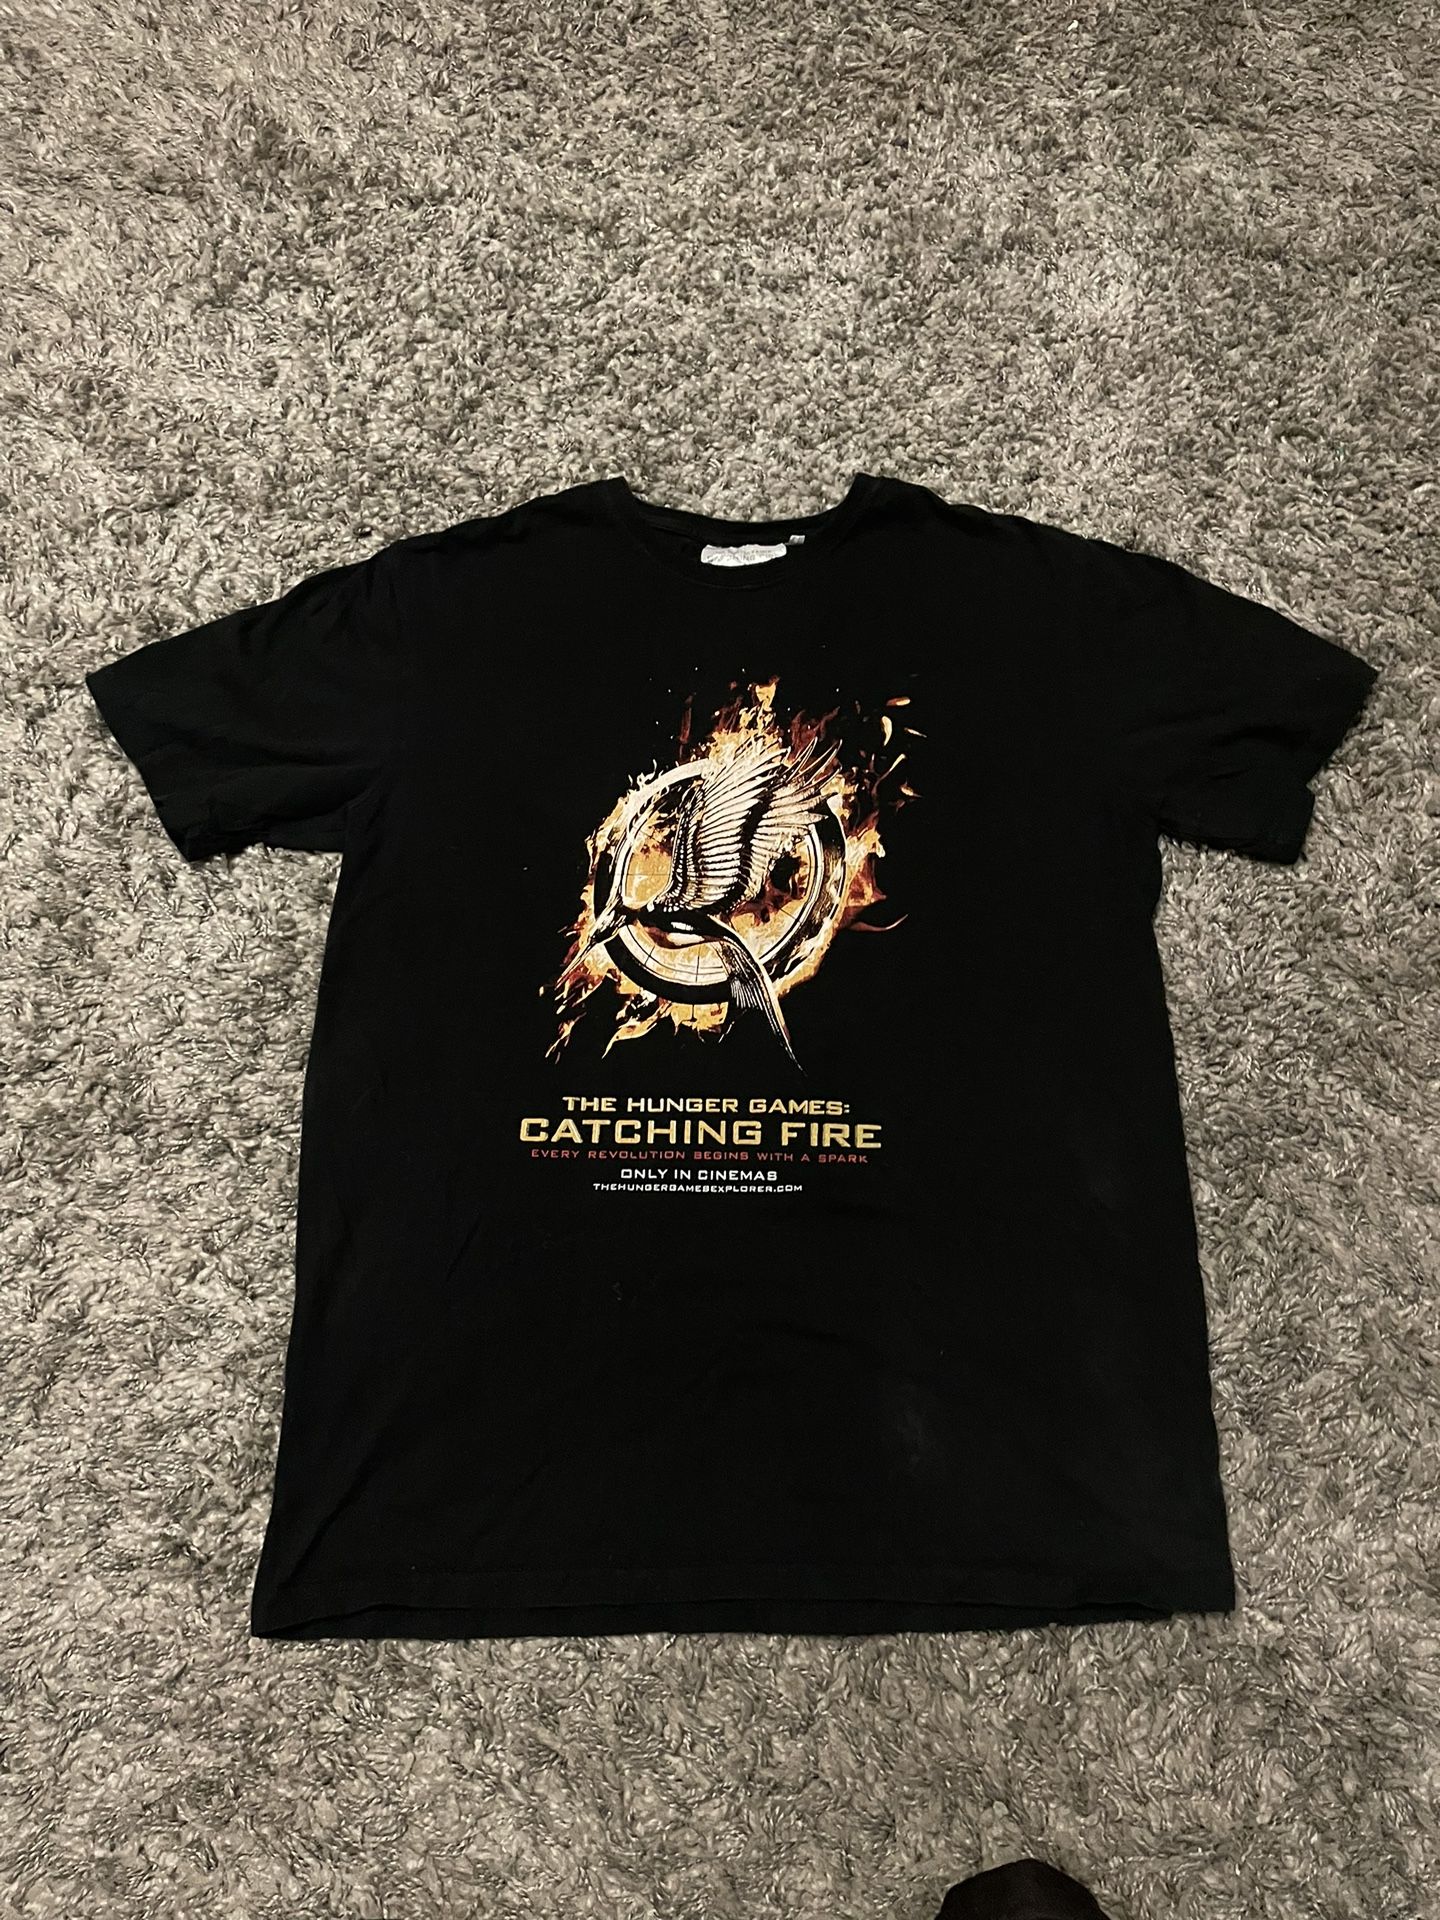 Promotional Movie Tee “ Hunger Games:Catching Fire “ 